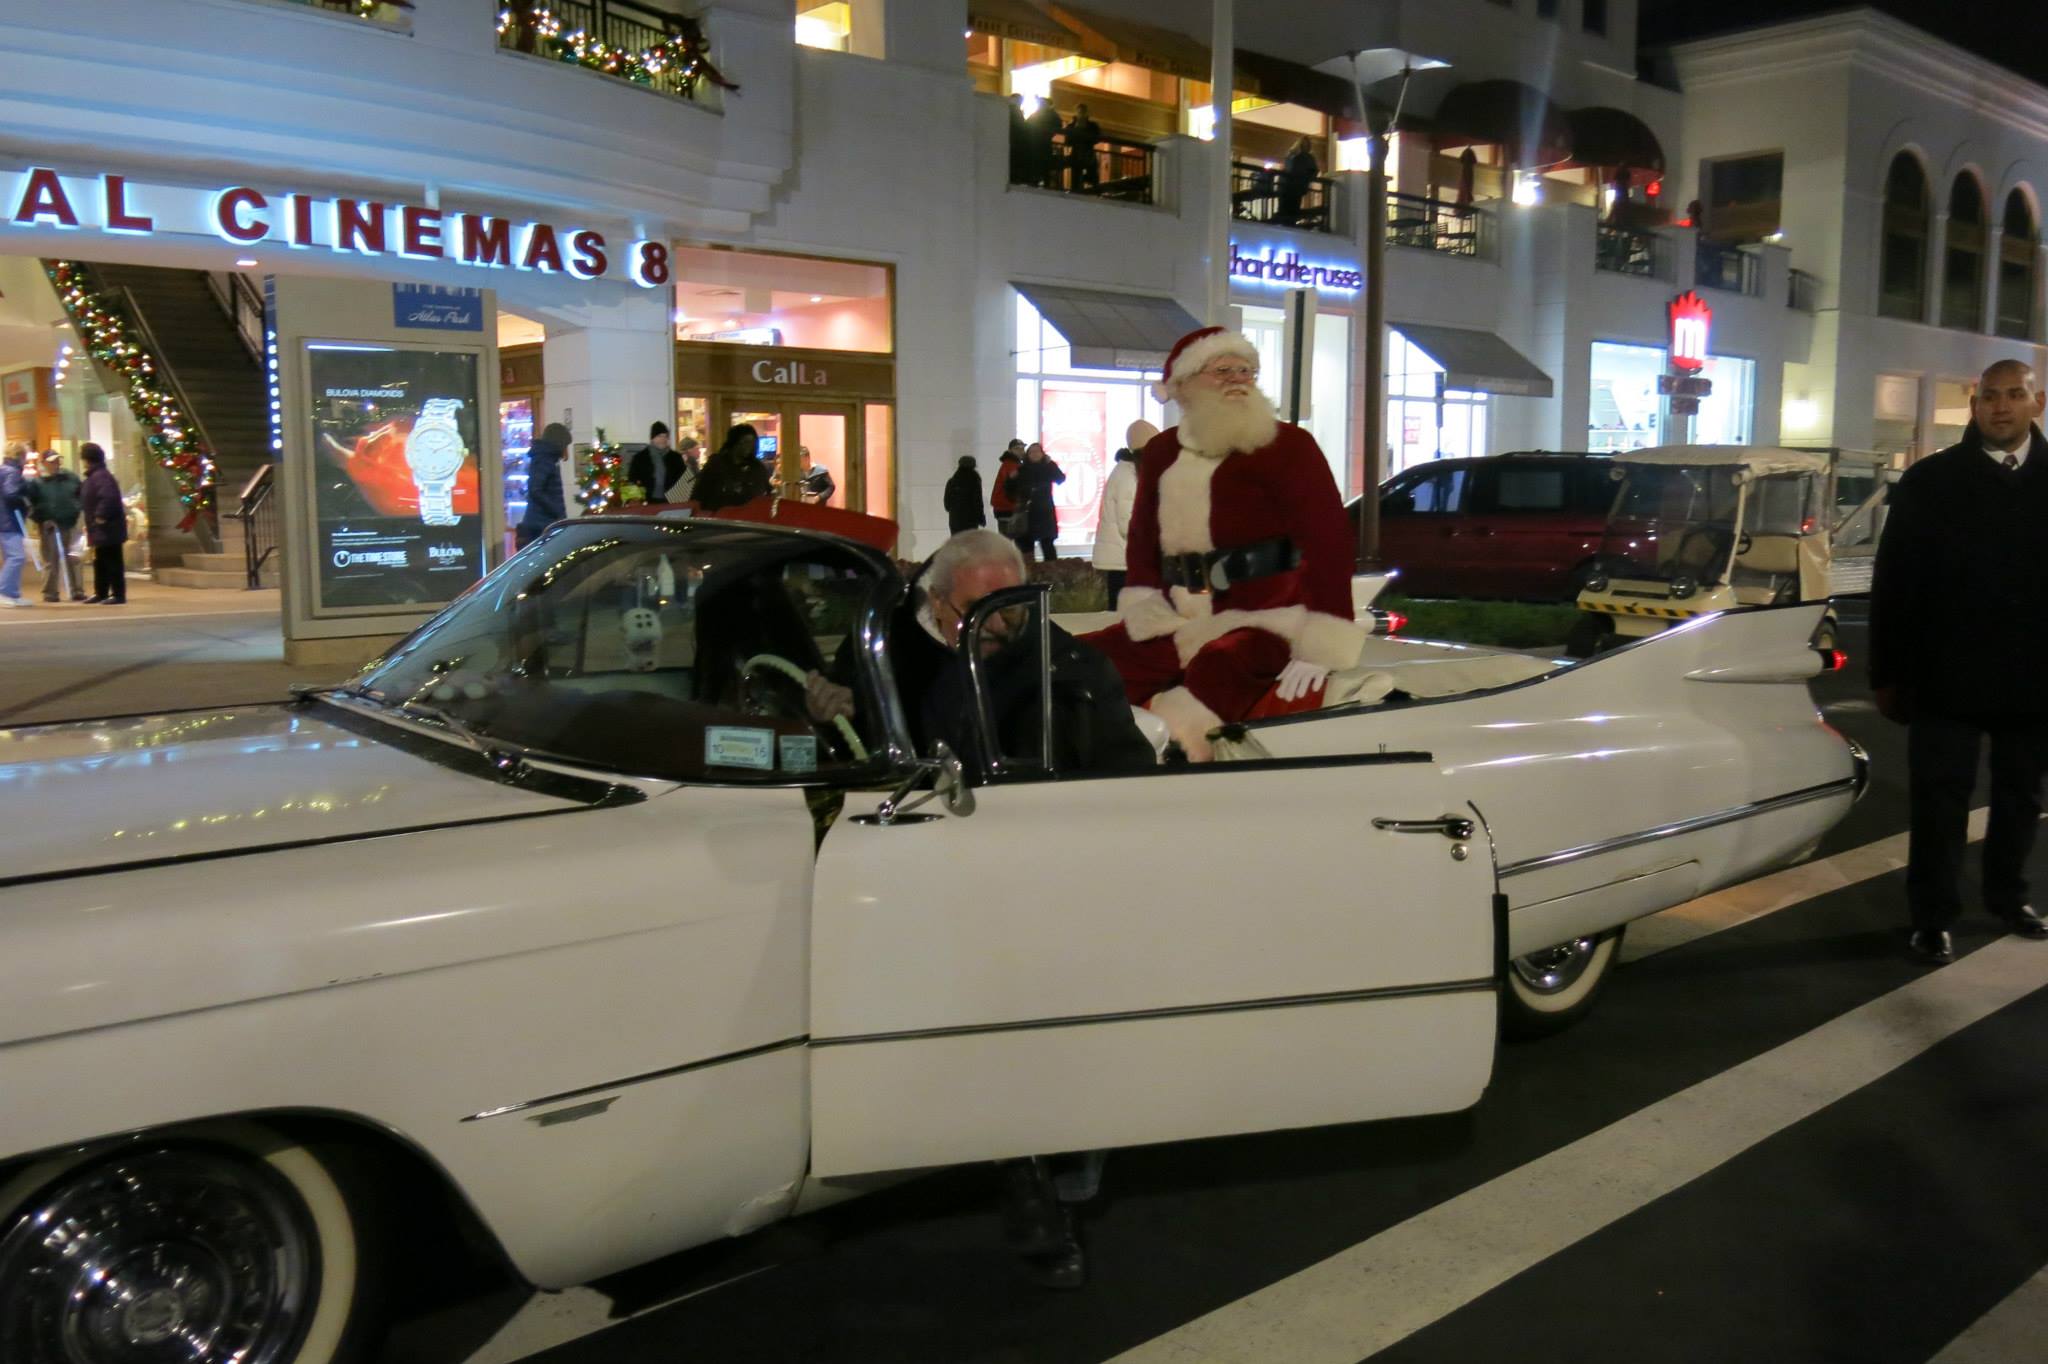 Santa arrived less traditionally, and more stylishly, in a white Cadillac this year. Photo Courtesy Atlas Park Shops